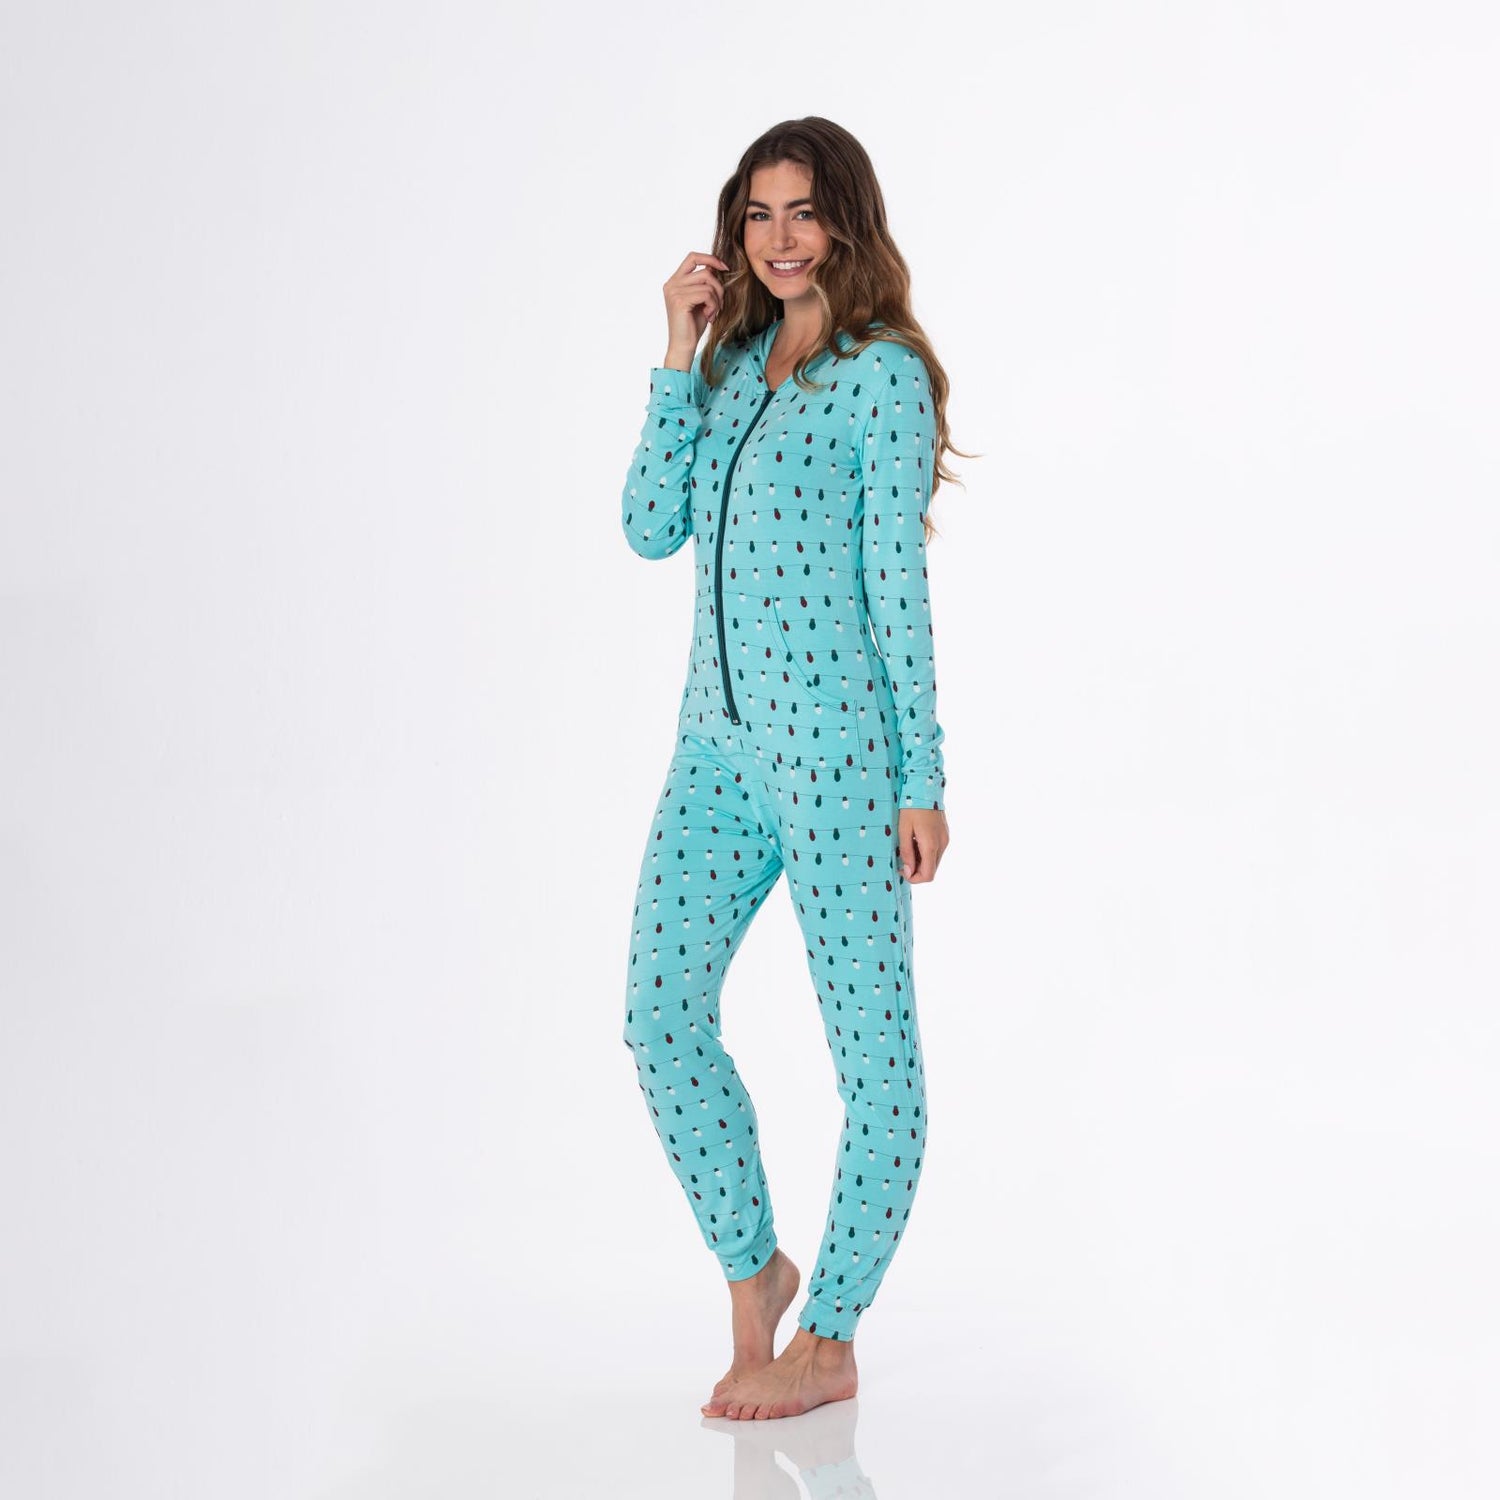 Women's Print Long Sleeve Jumpsuit with Hood in Iceberg Holiday Lights